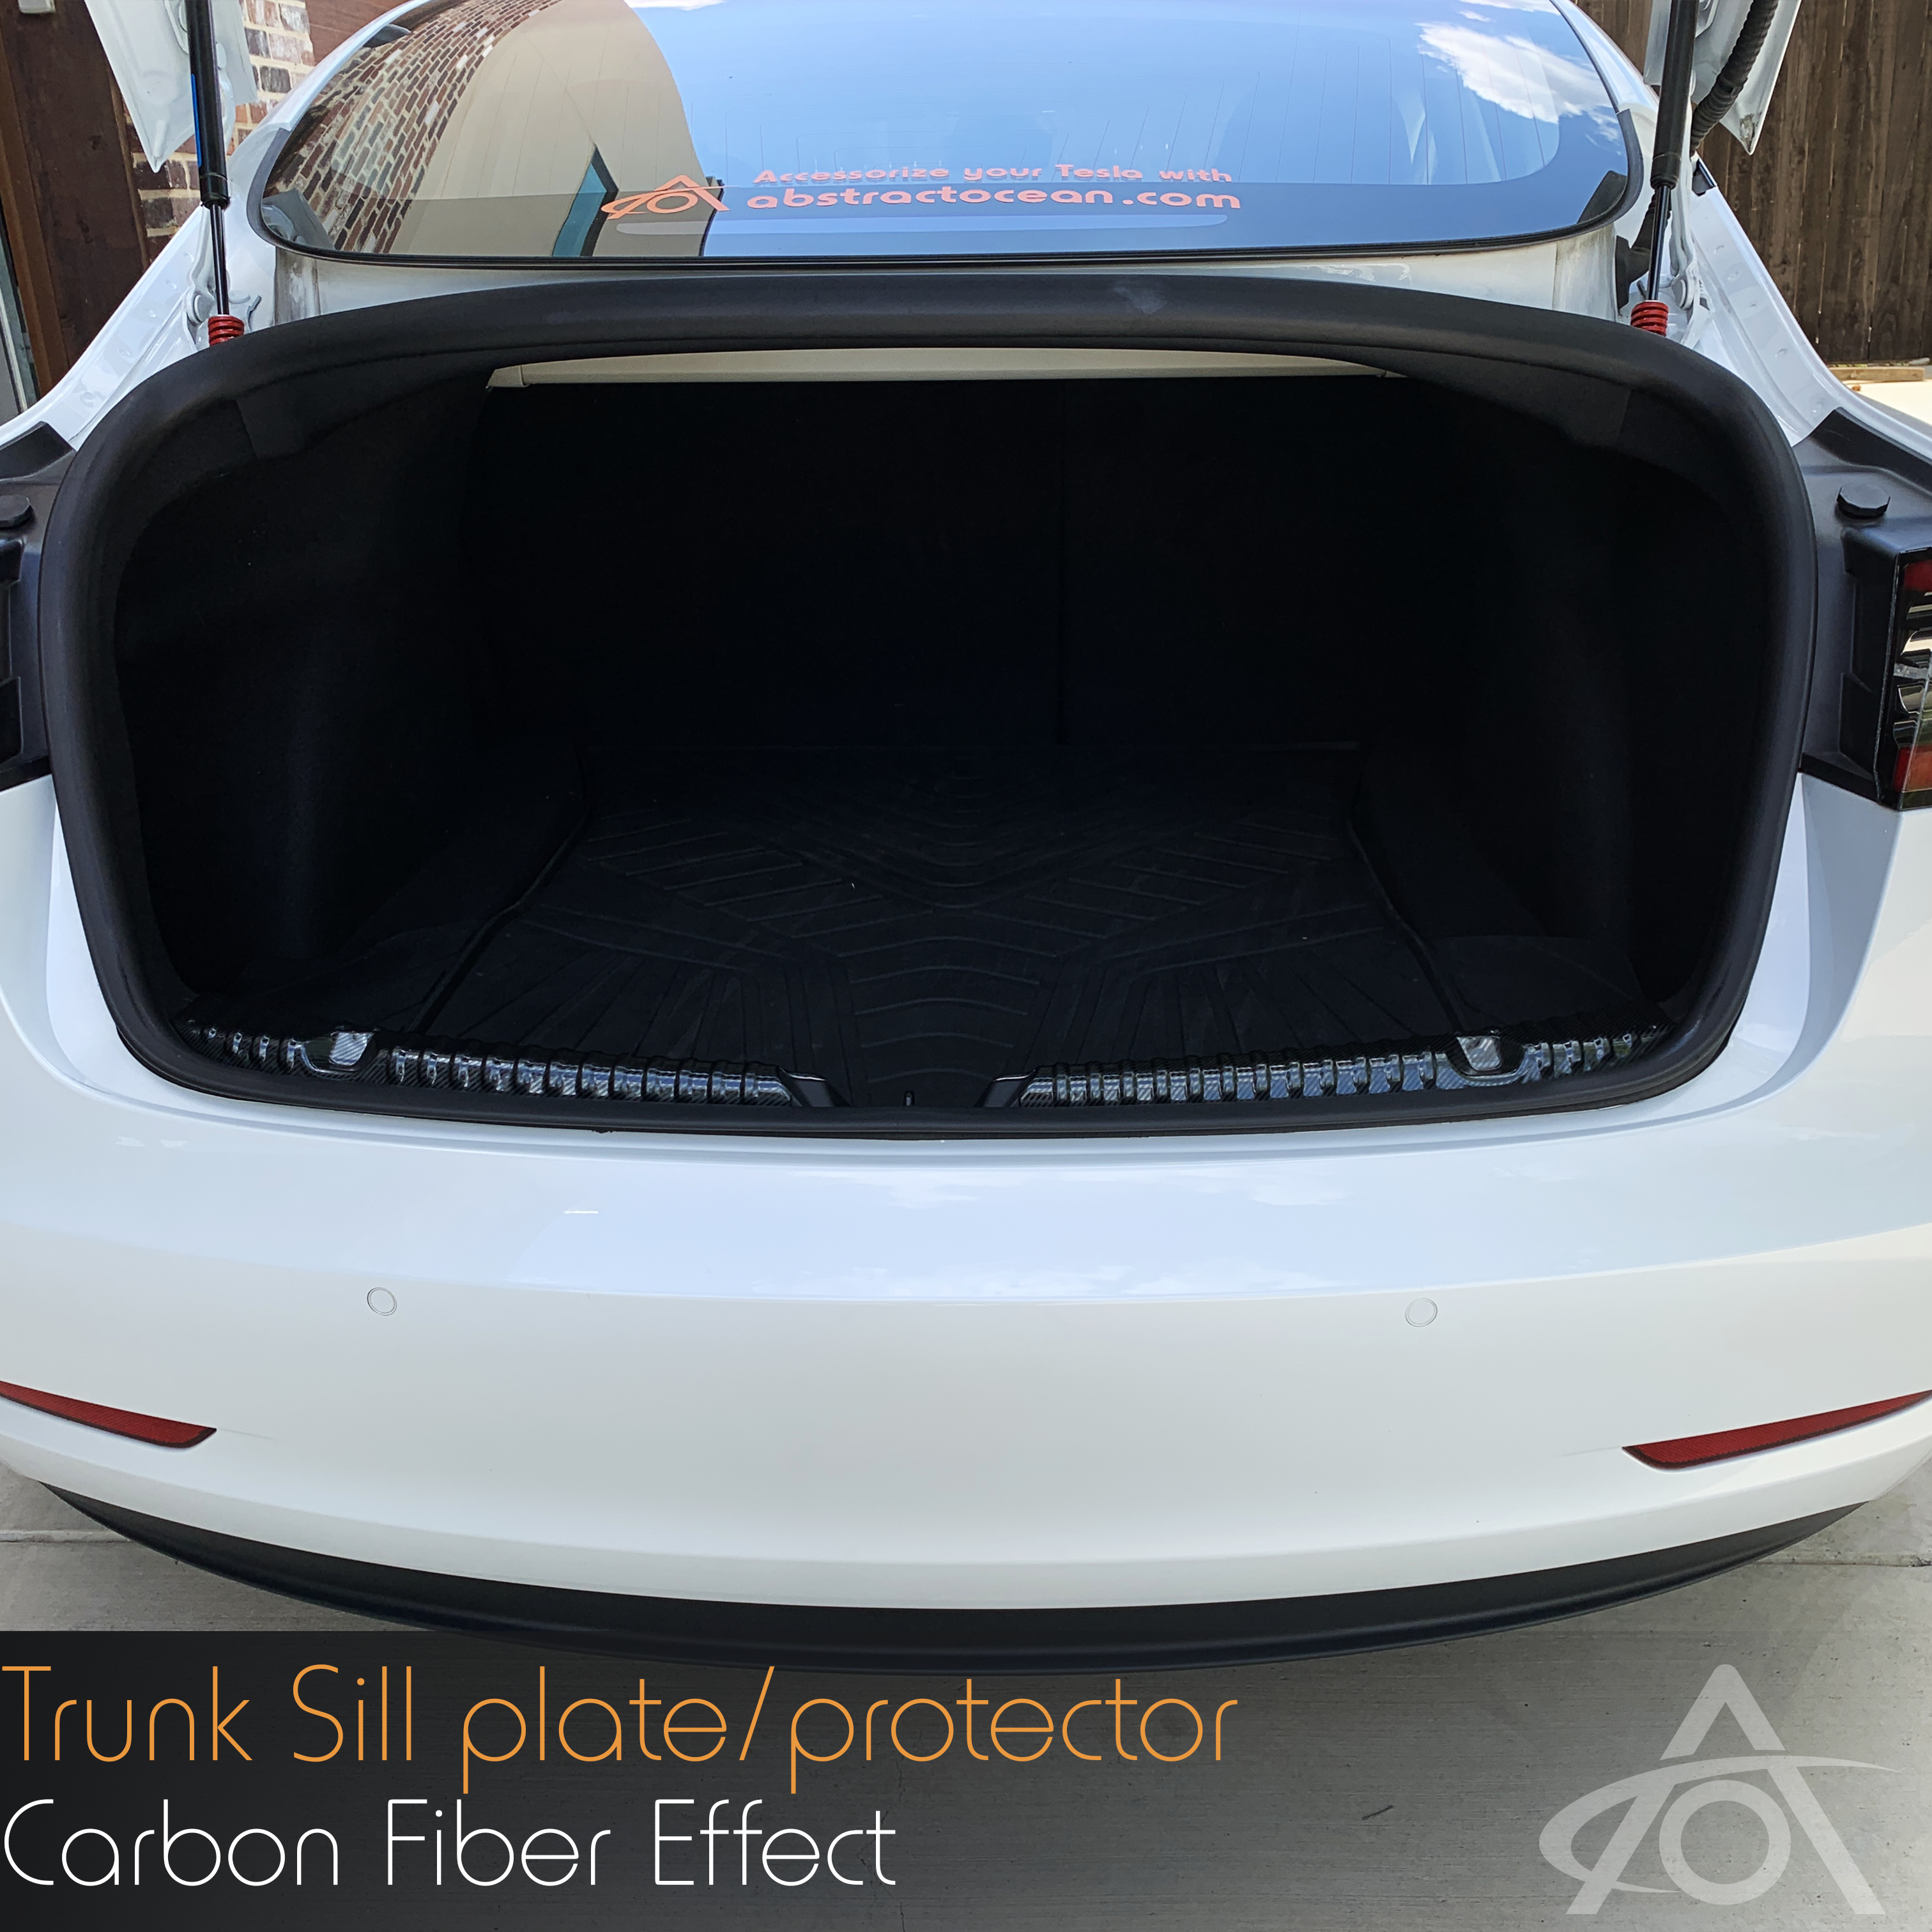 Trunk sill protector in Carbon Fiber